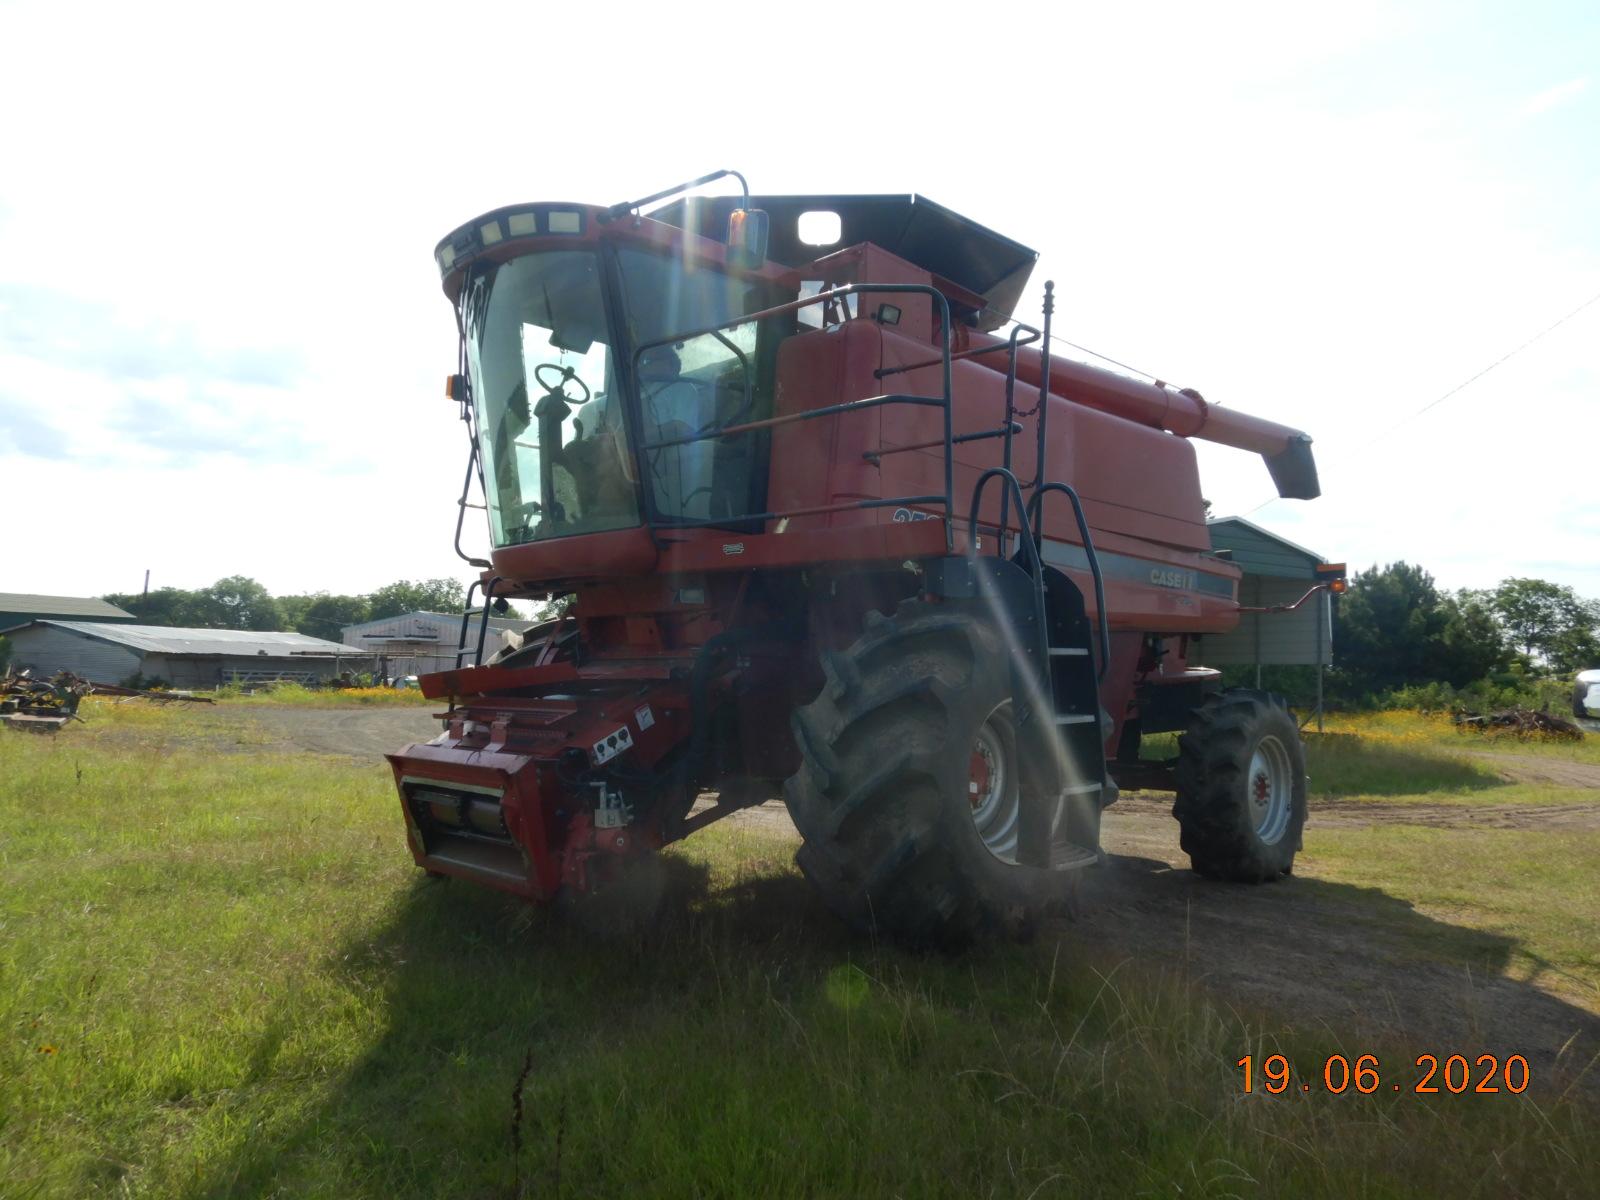 CIH 2588 COMBINE,  HOPPER EXTENSION, 35.5L32 TIRES, 2 YEARS ON NEW ROTOR, $